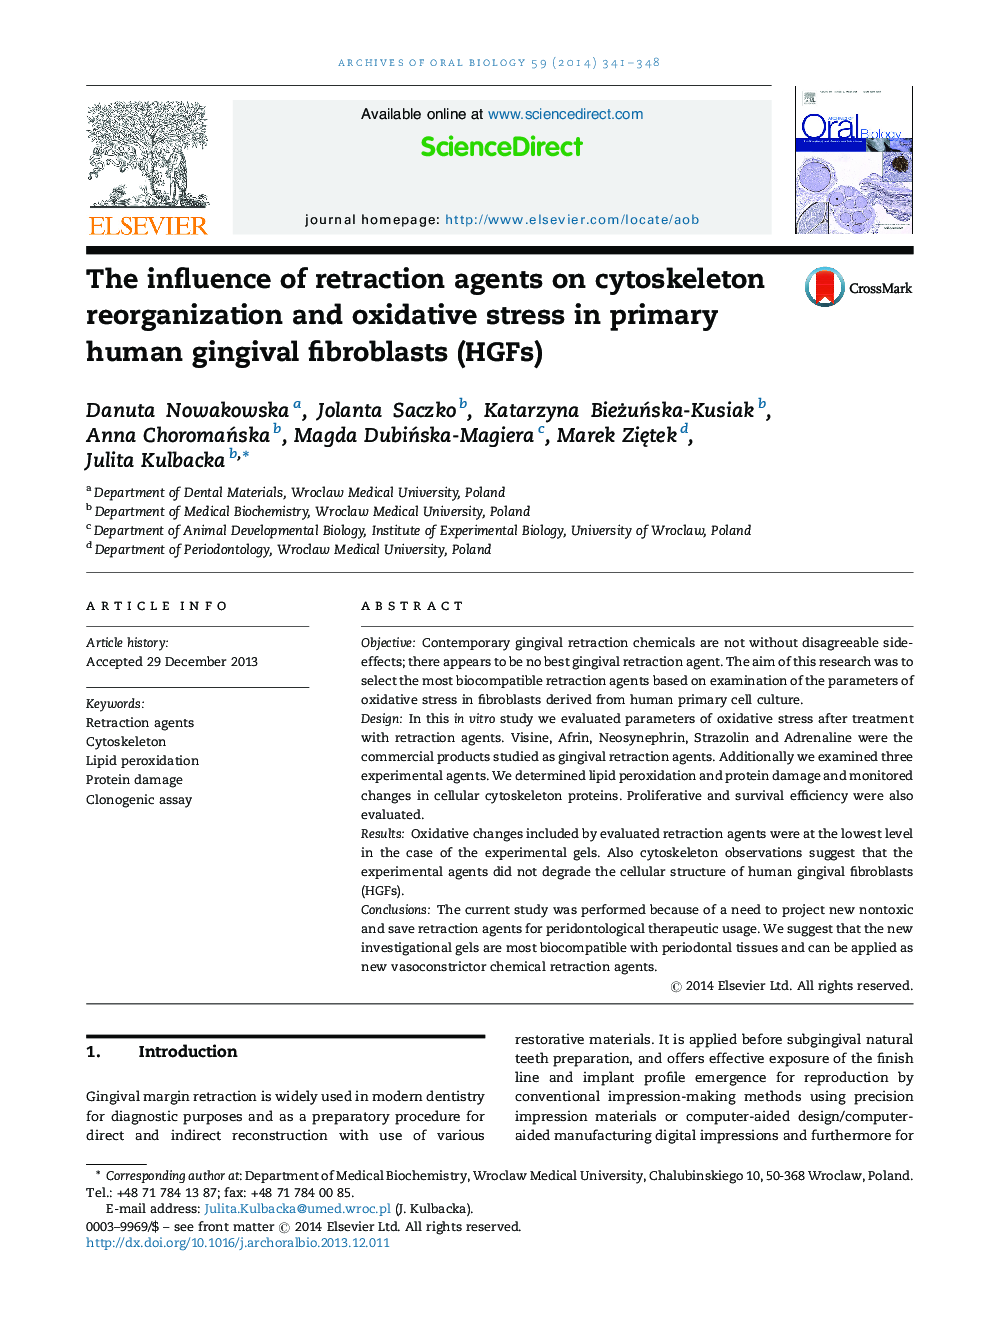 The influence of retraction agents on cytoskeleton reorganization and oxidative stress in primary human gingival fibroblasts (HGFs)